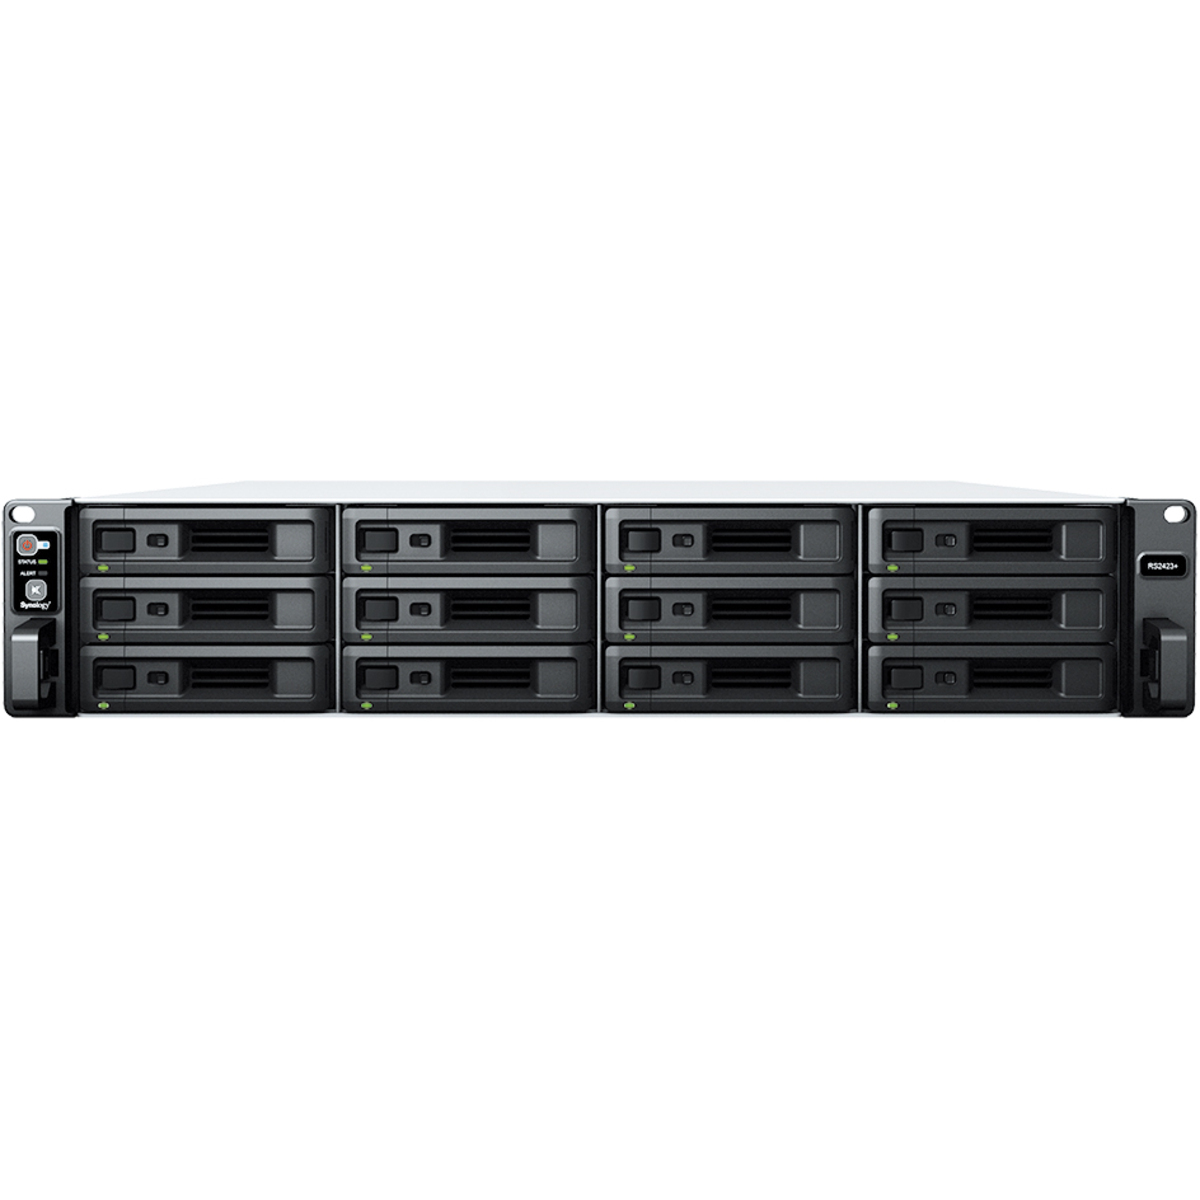 Synology RackStation RS2423RP+ 216tb 12-Bay RackMount Multimedia / Power User / Business NAS - Network Attached Storage Device 9x24tb Seagate IronWolf Pro ST24000NT002 3.5 7200rpm SATA 6Gb/s HDD NAS Class Drives Installed - Burn-In Tested - FREE RAM UPGRADE RackStation RS2423RP+